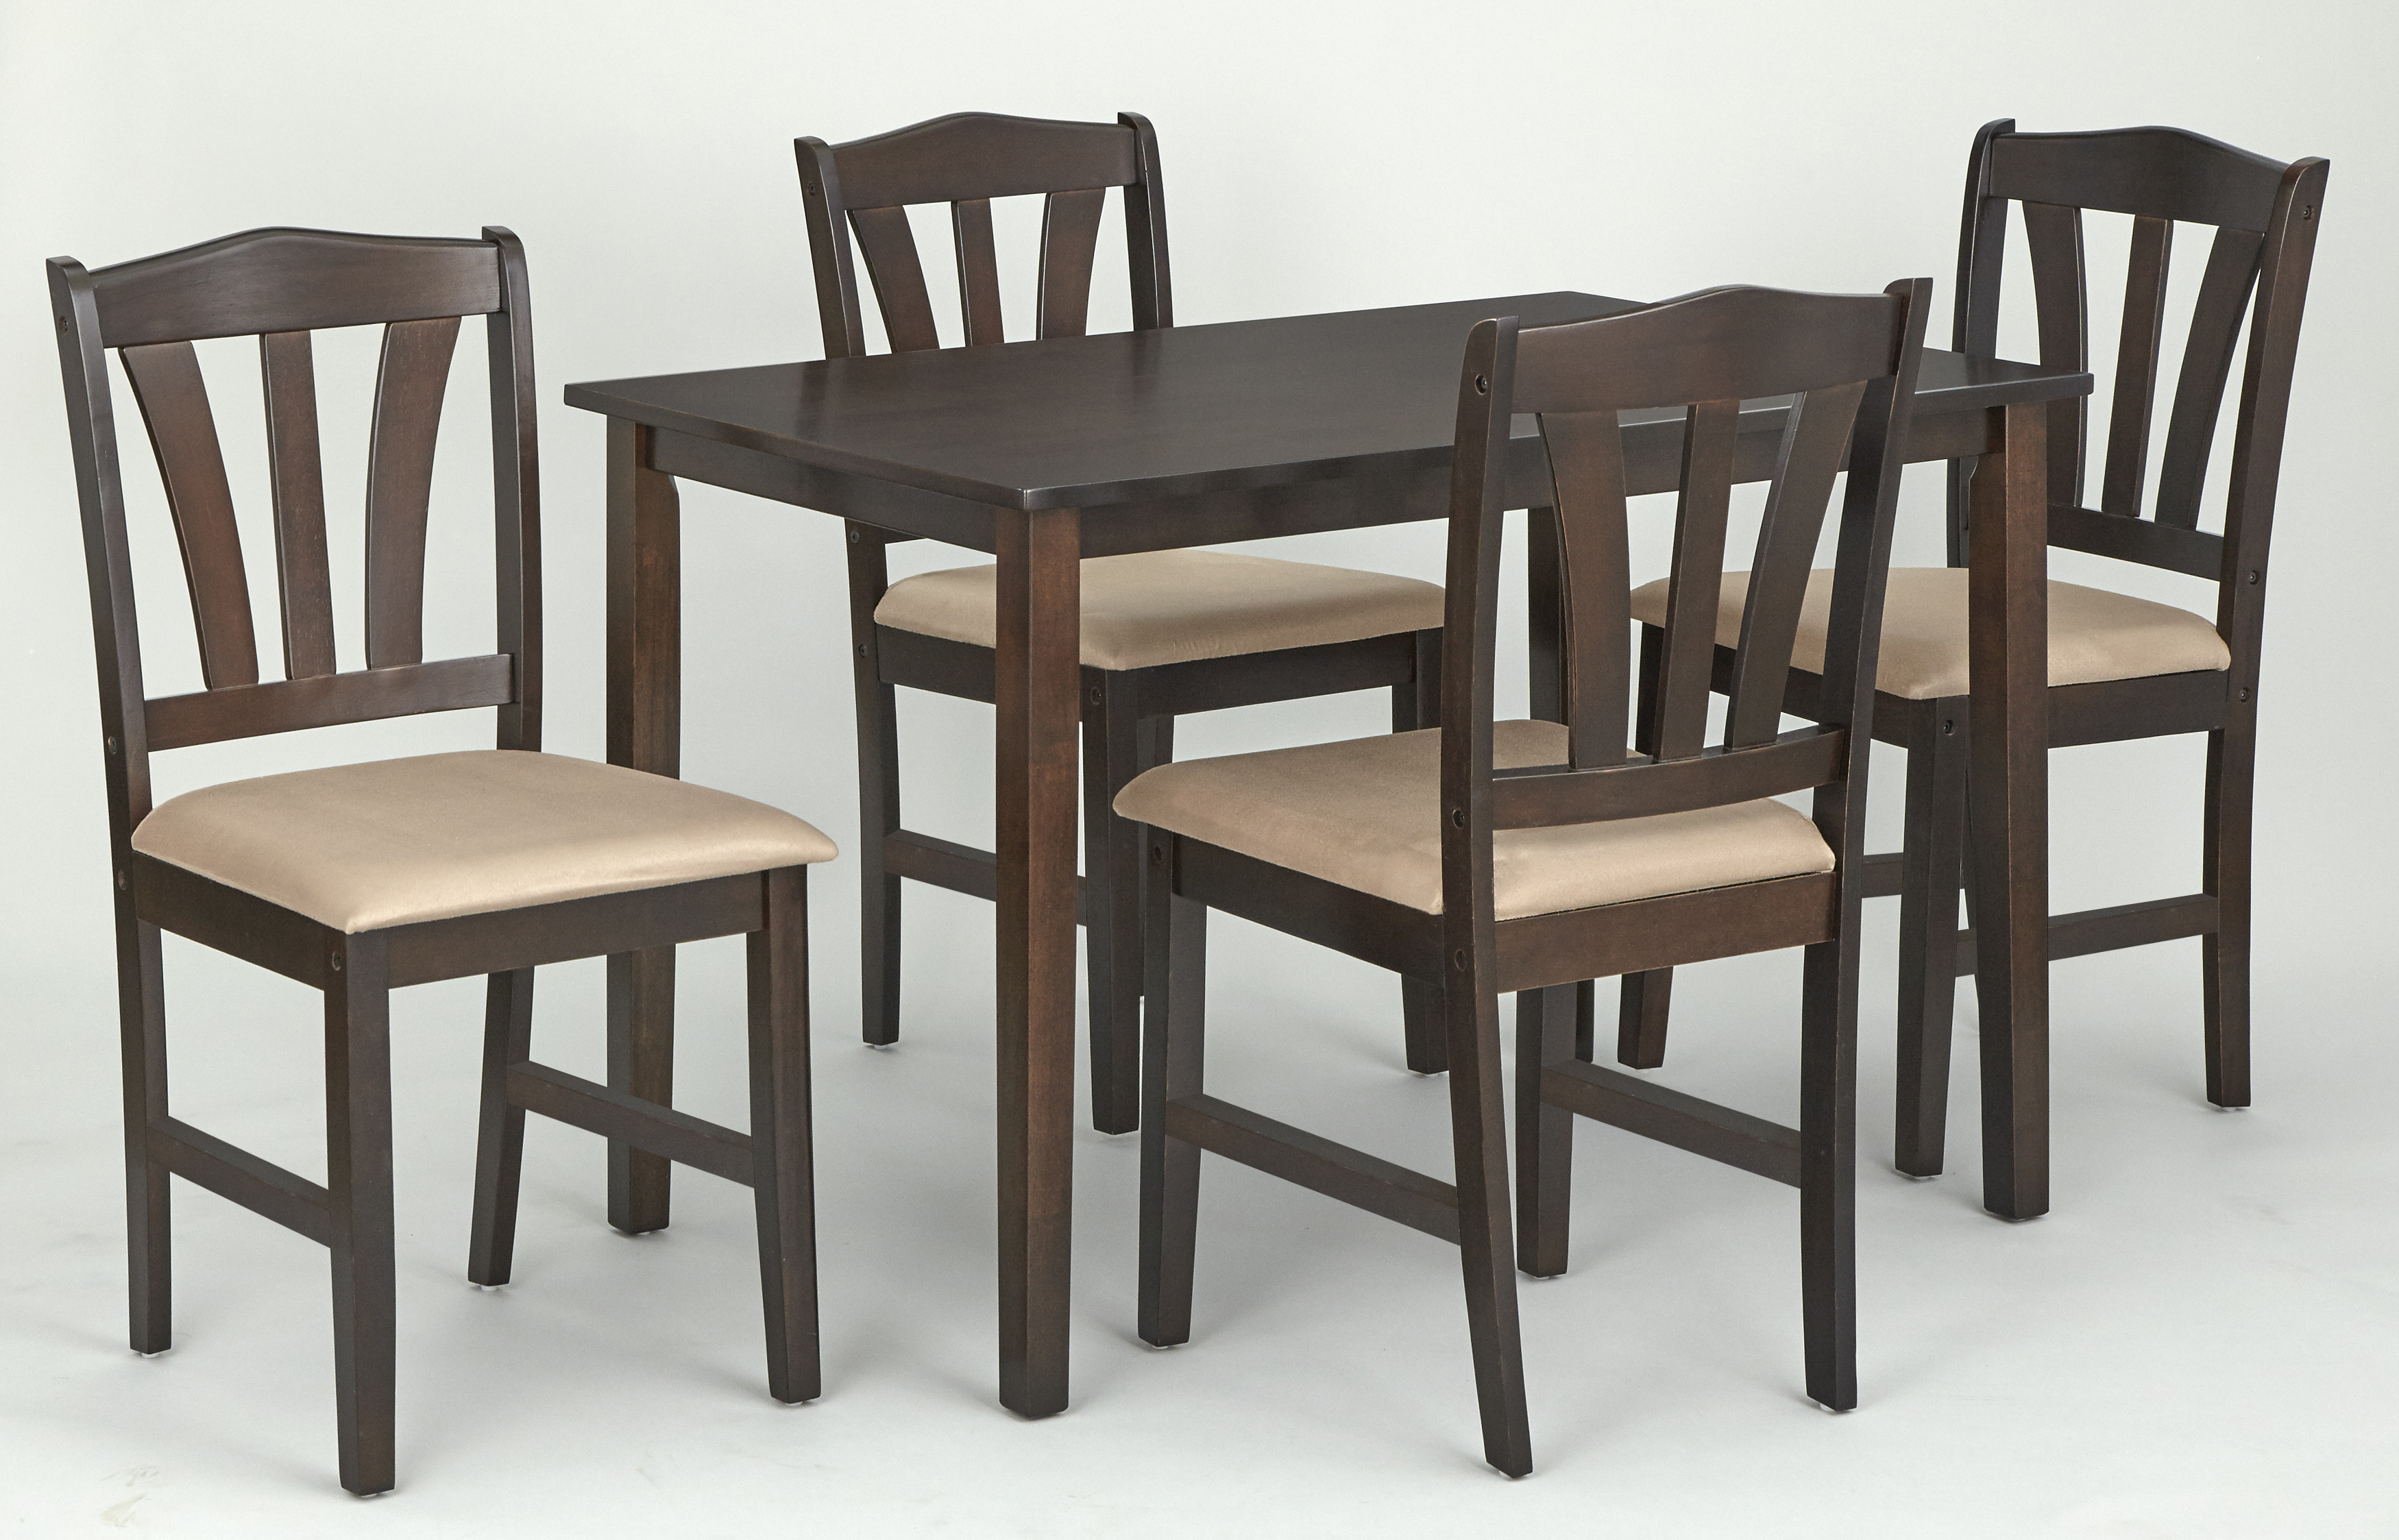 TMS Metropolitan 5-Piece Indoor Wood Dining Set with Table and Chairs, Espresso - image 1 of 7